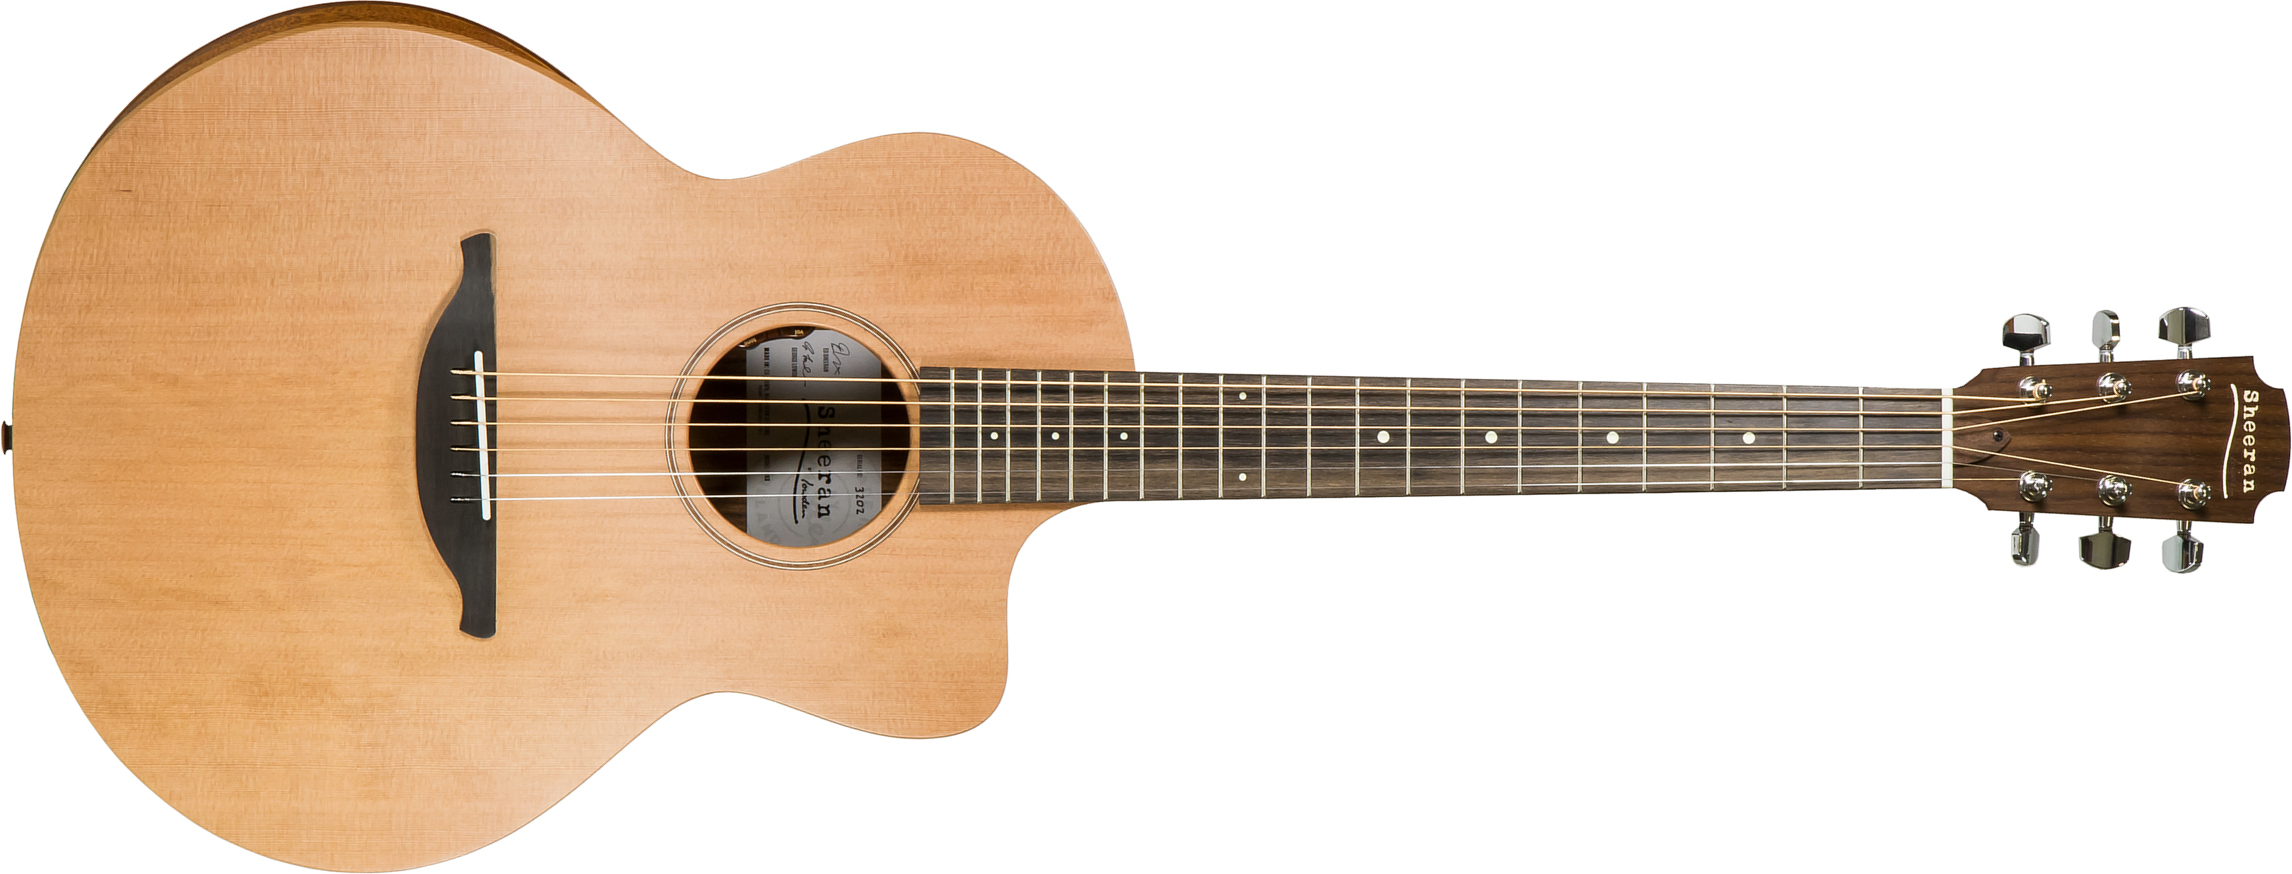 Sheeran By Lowden S03 Orchestra Model Cedre Palissandre Eb +housse - Natural Satin - Guitarra acústica & electro - Main picture